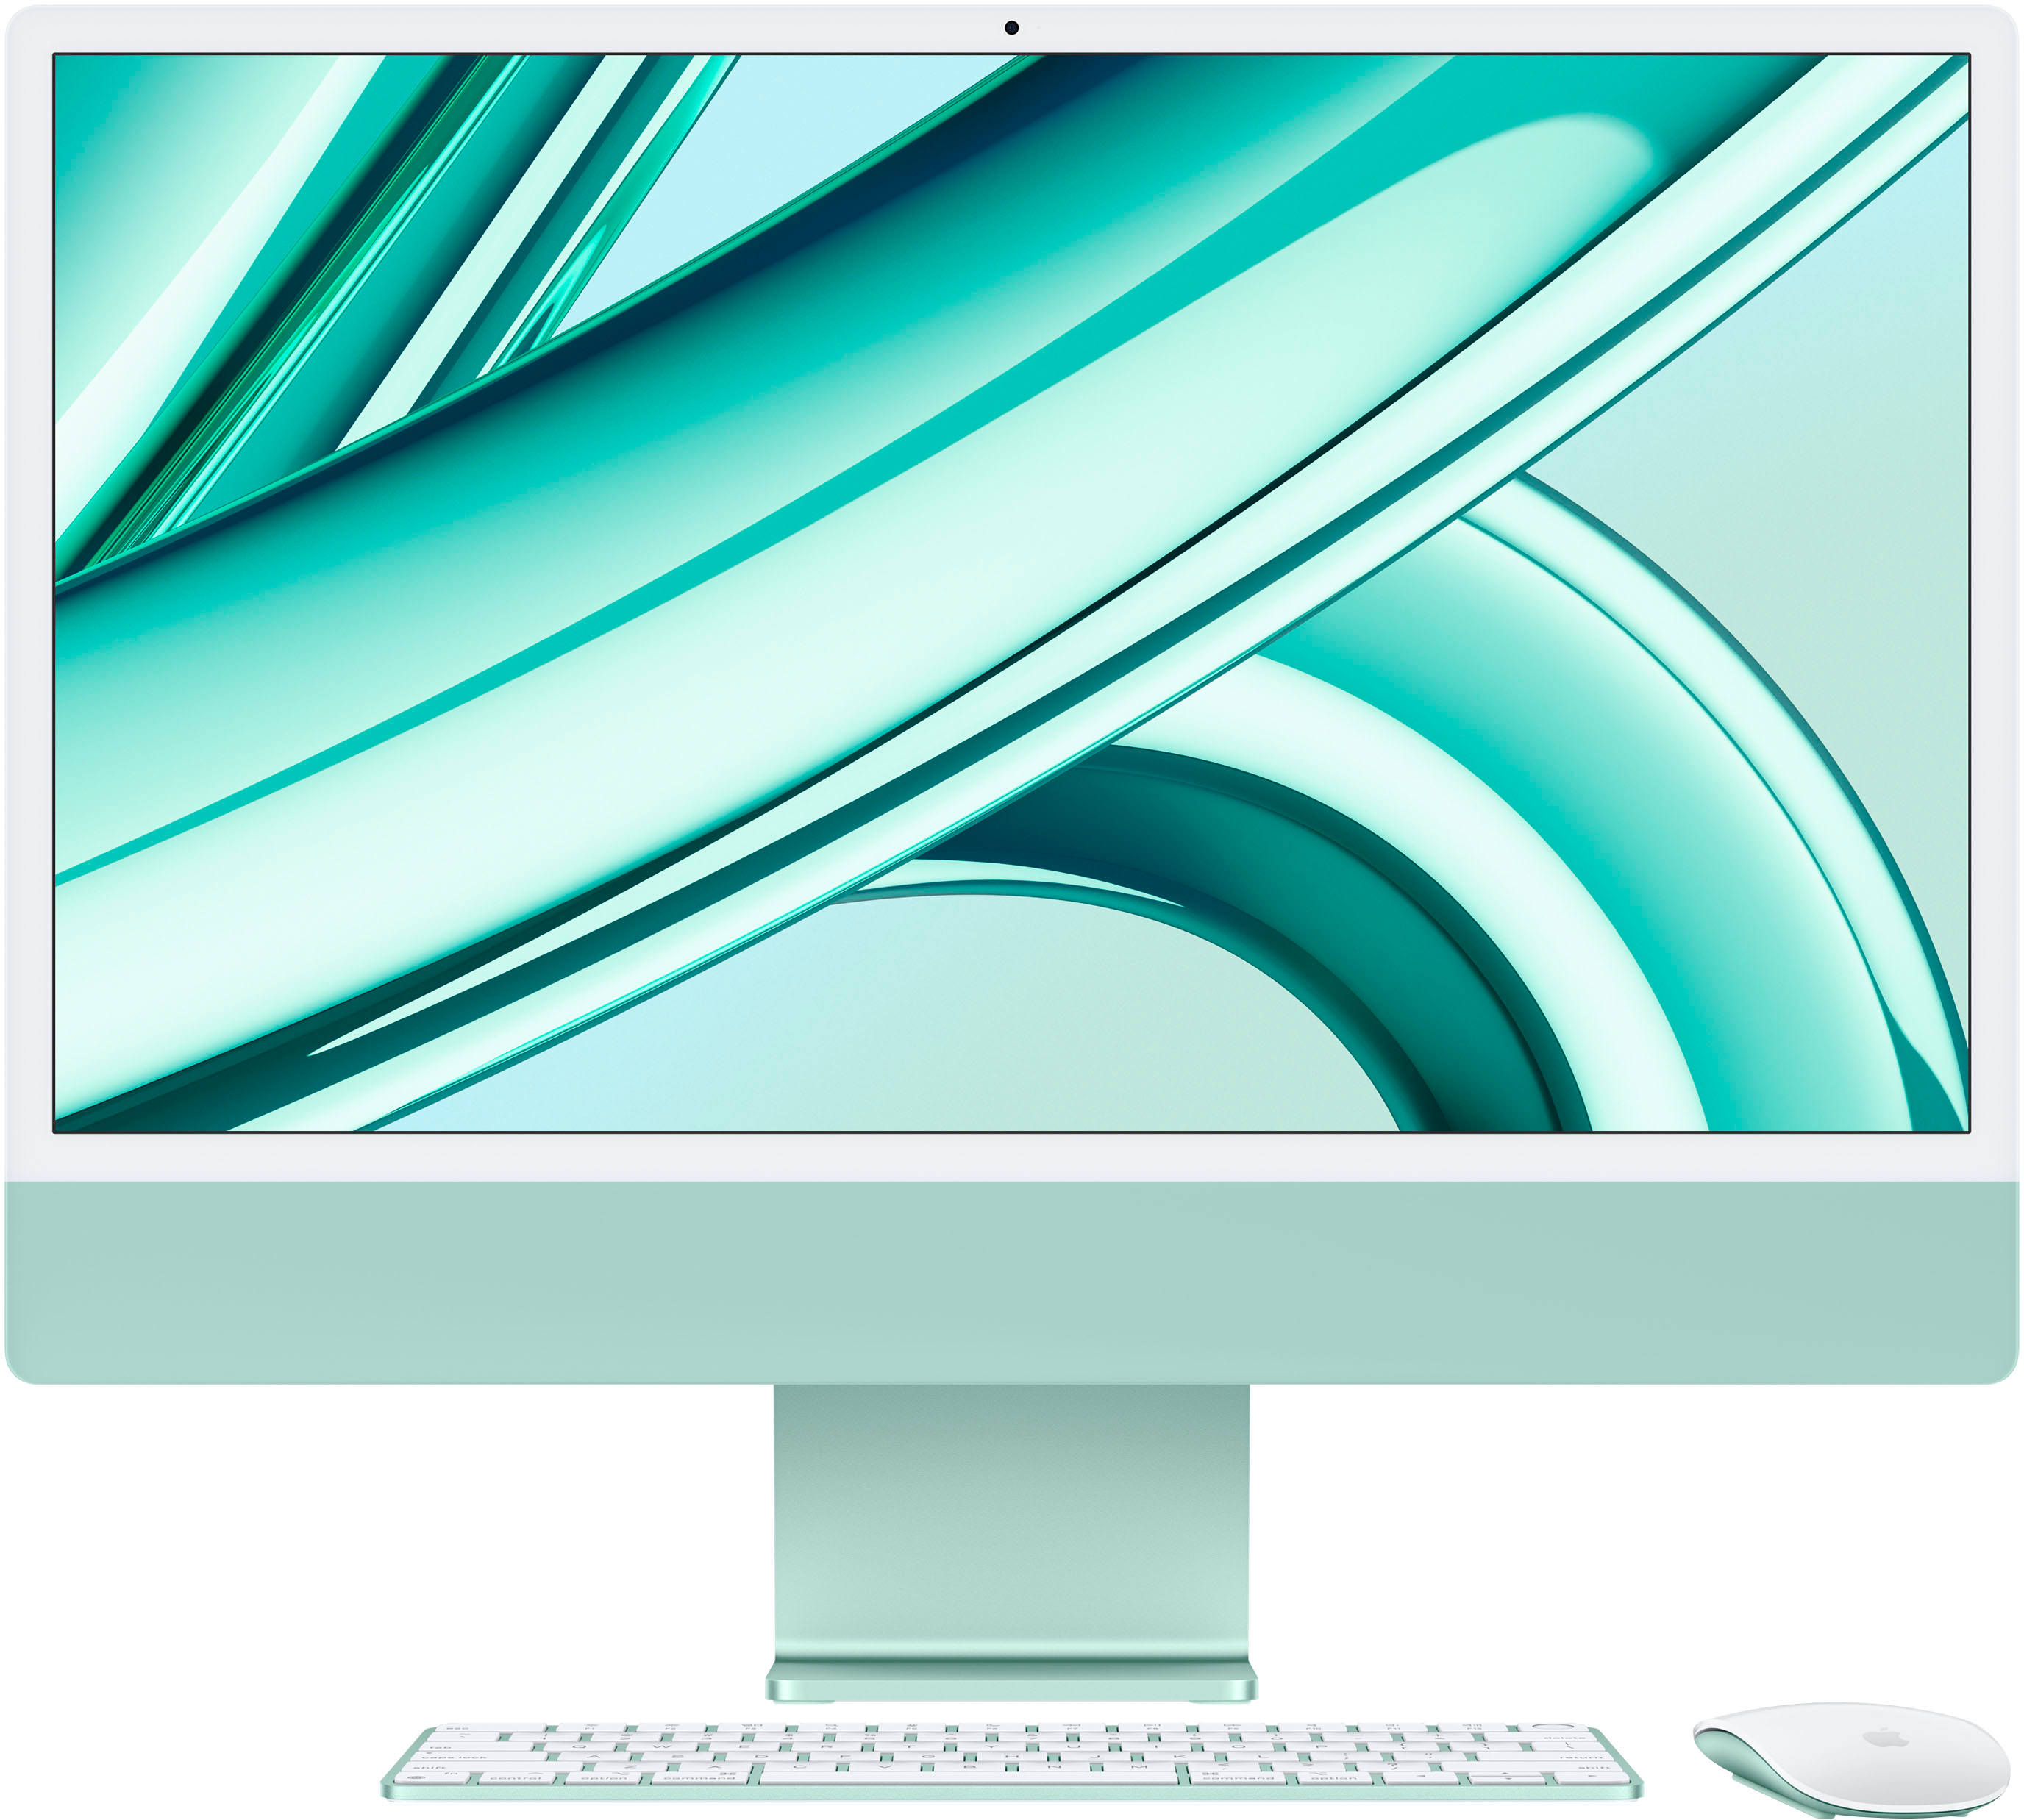 Some M1 iMac models appear to sit off-center due to manufacturing flaw